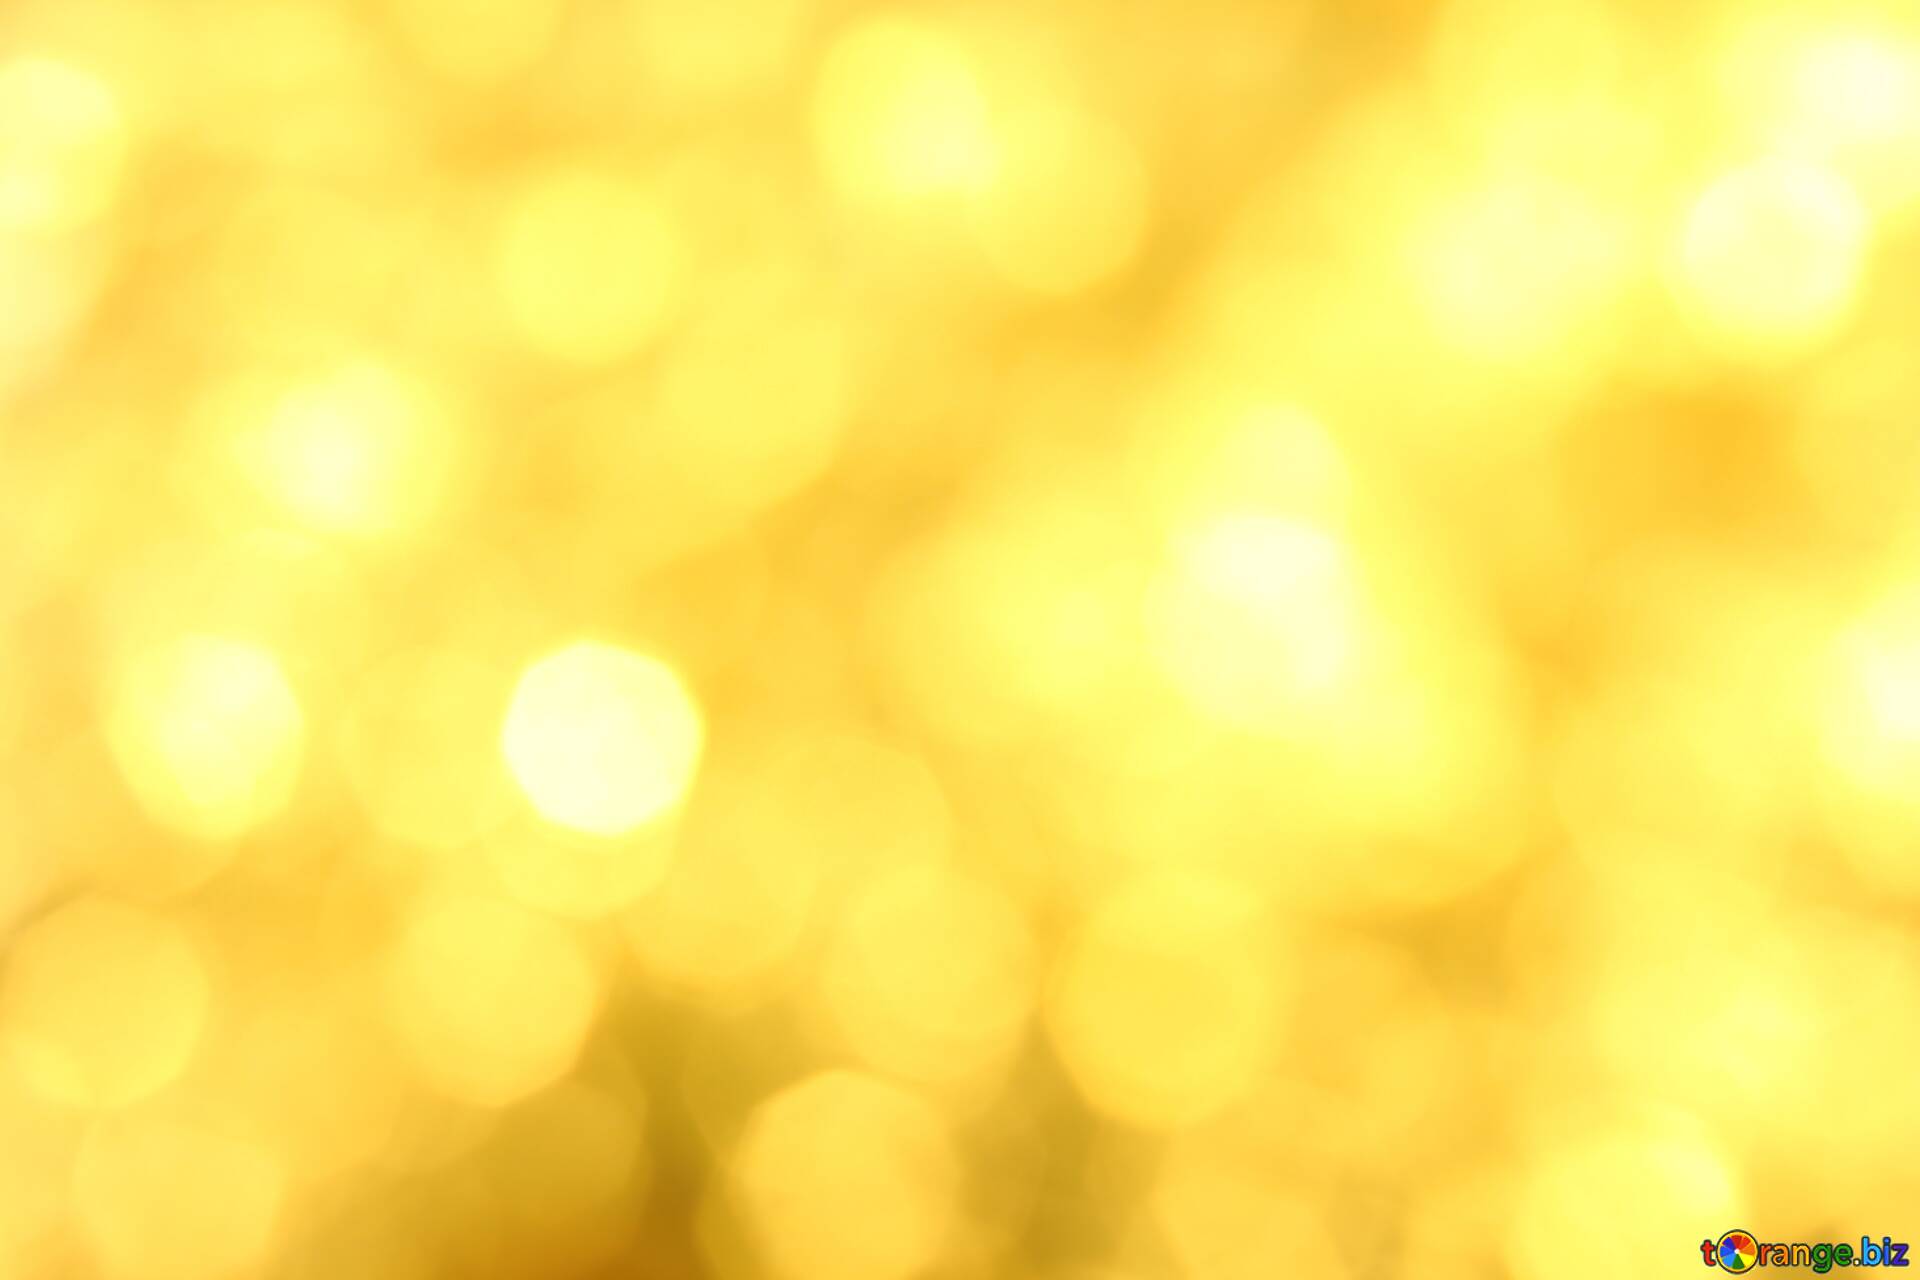 Download free picture Gold background blurring on CC-BY License ~ Free  Image Stock  ~ fx №207391